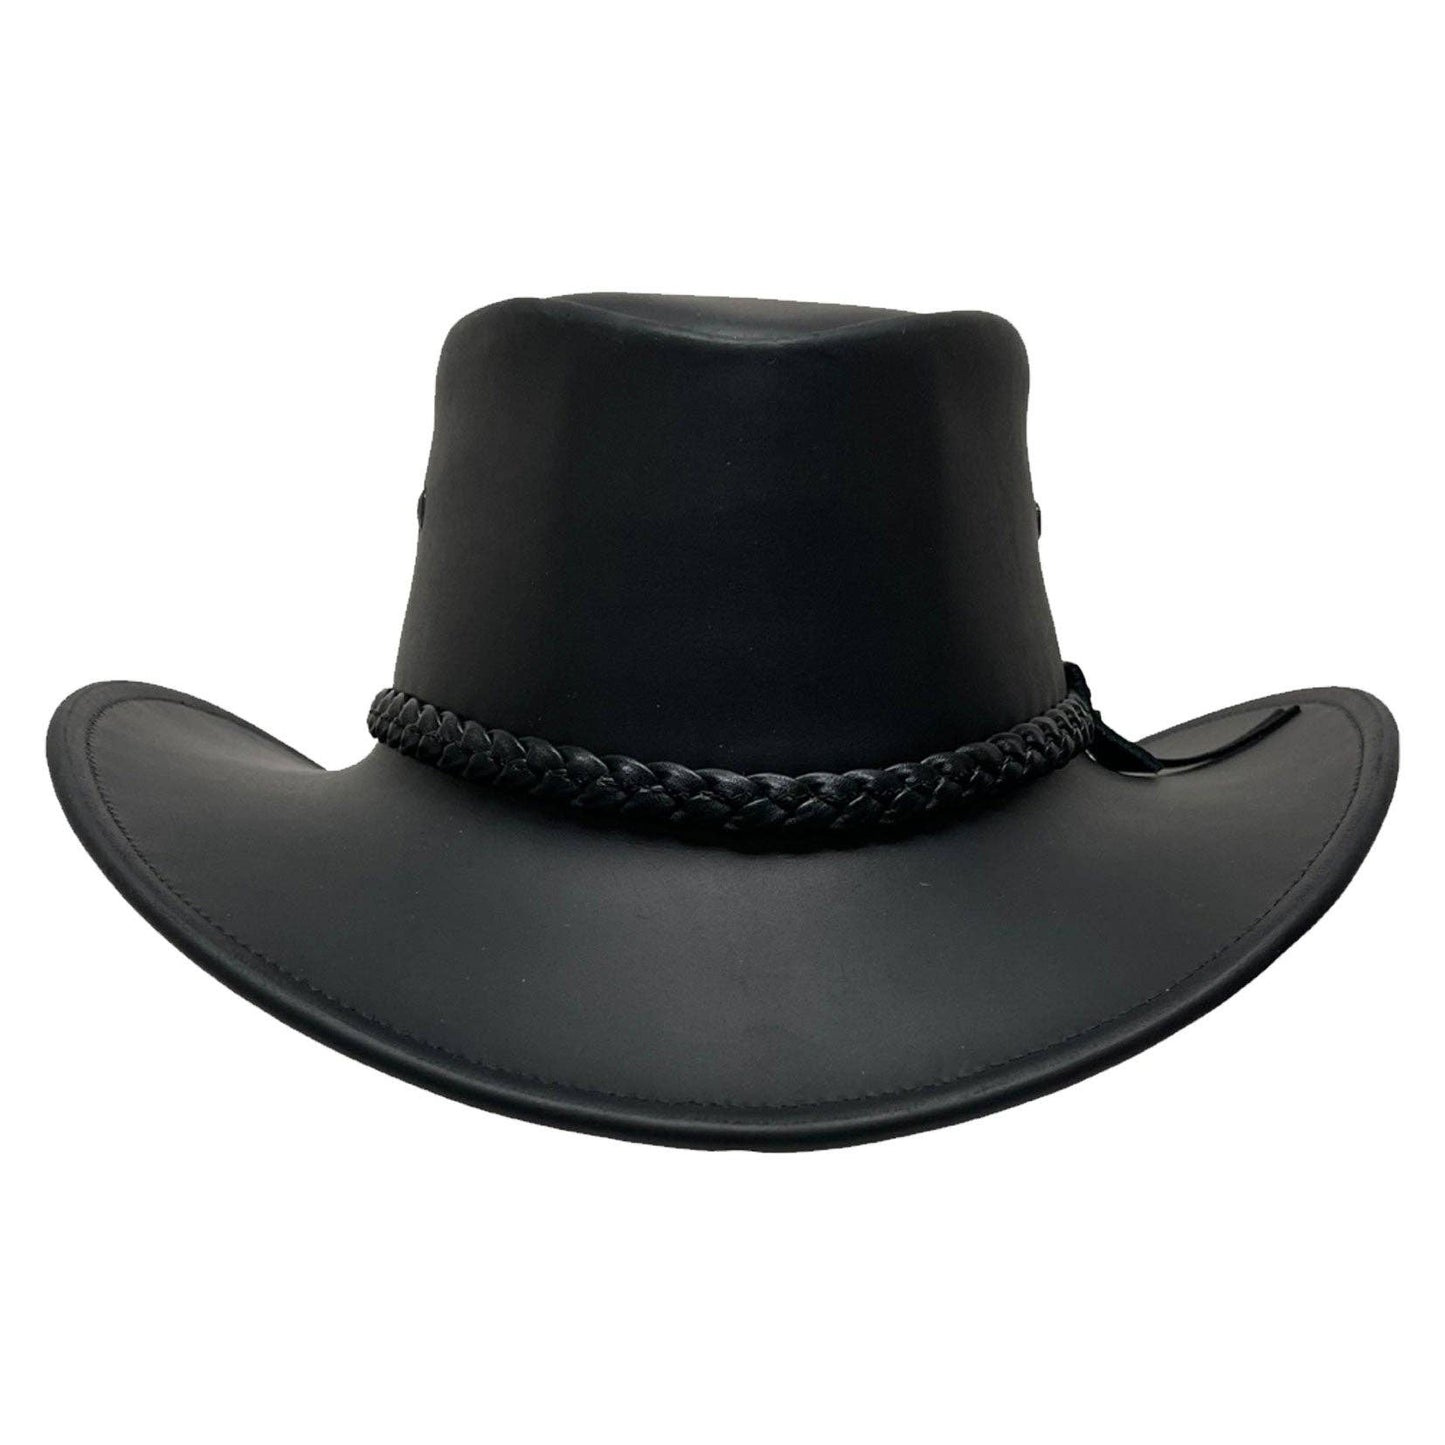 Bushman - Mens Outback Leather Hat